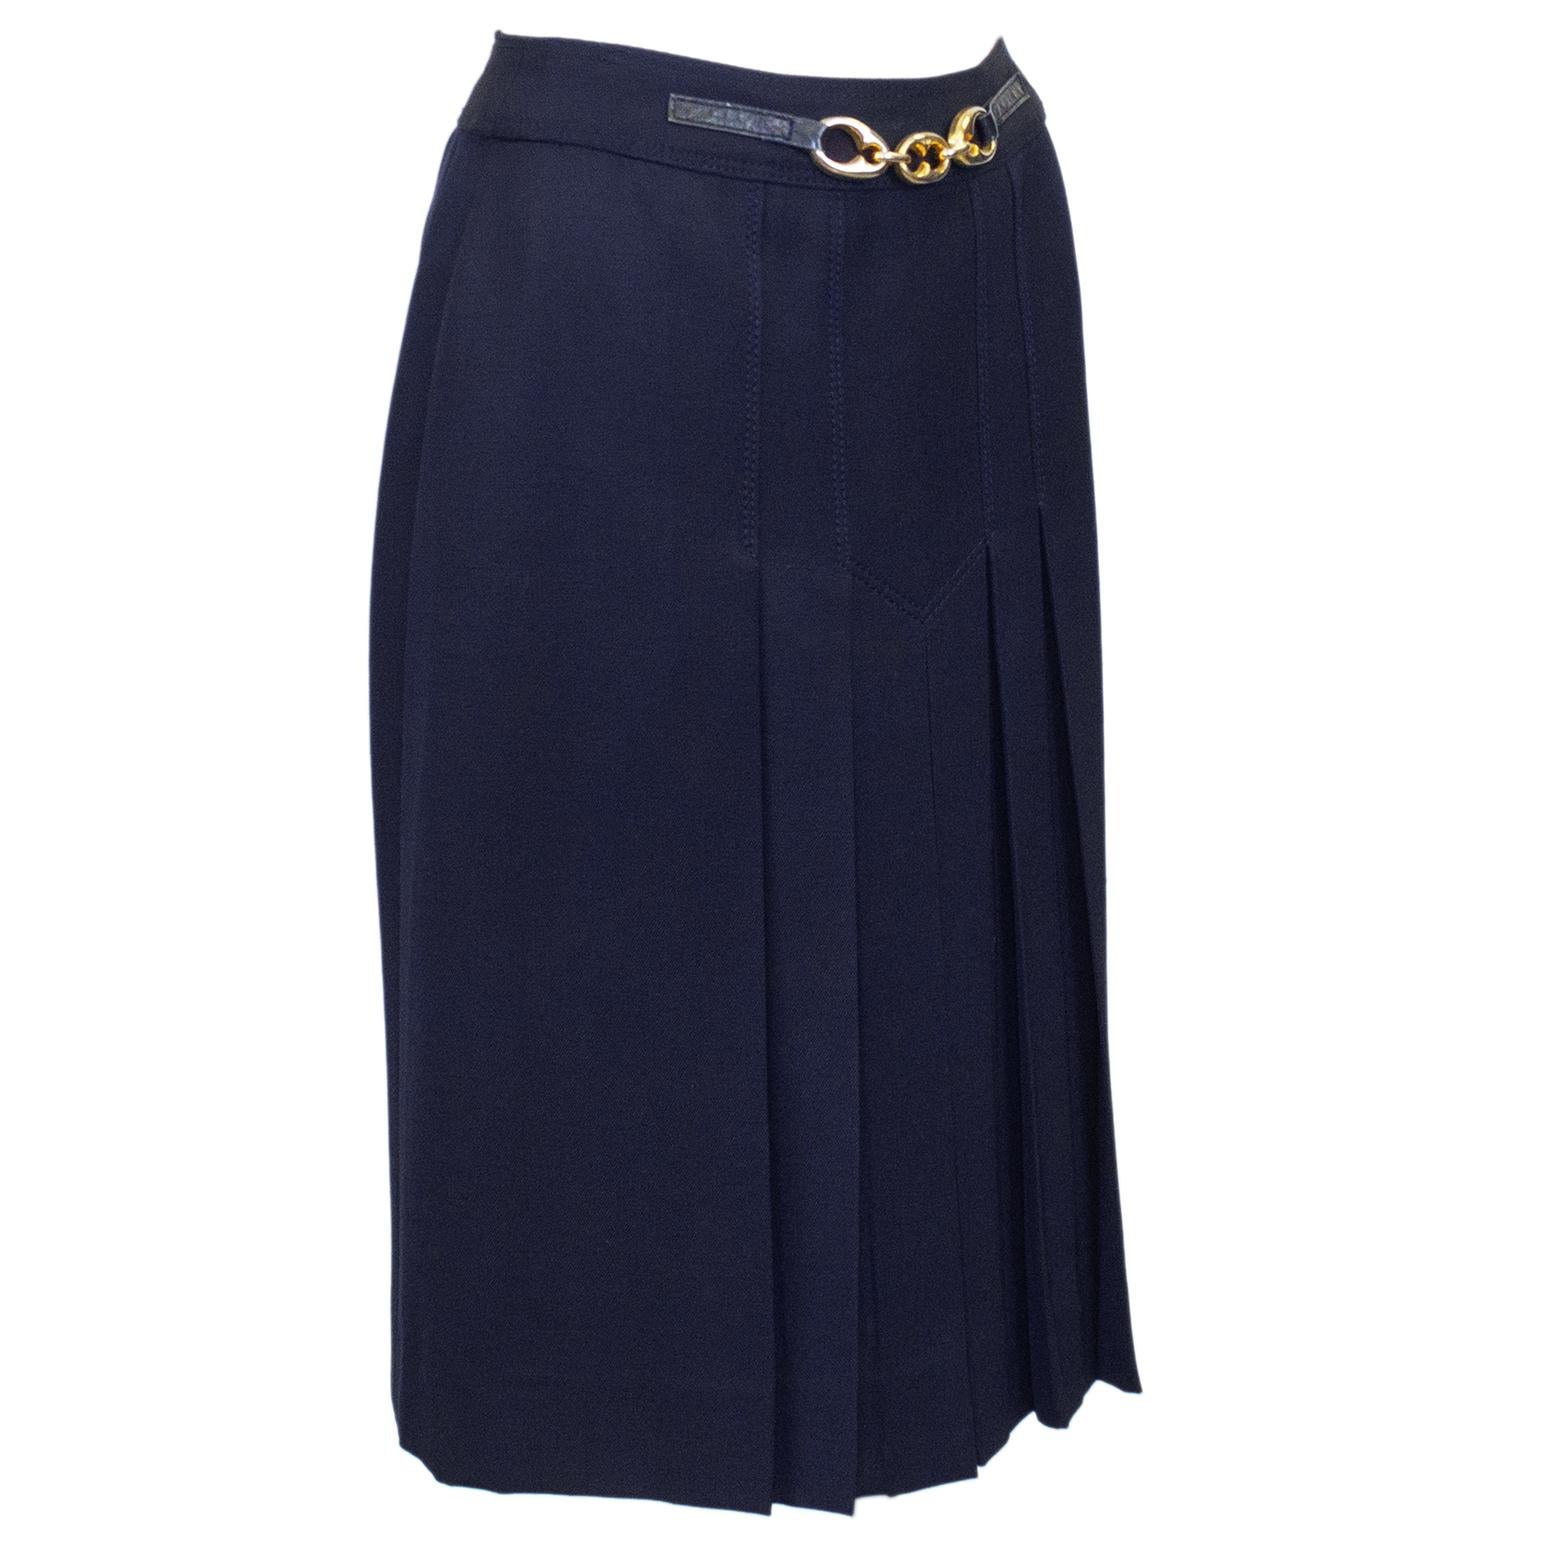 1970's classic Celine navy blue wool gabardine skirt with half navy leather and gold belt at waistband. Gold tone metal large mariner link detail at centre of belt. Inverted stitched pleats on the front and back. Overall A line shape.  Side zipper